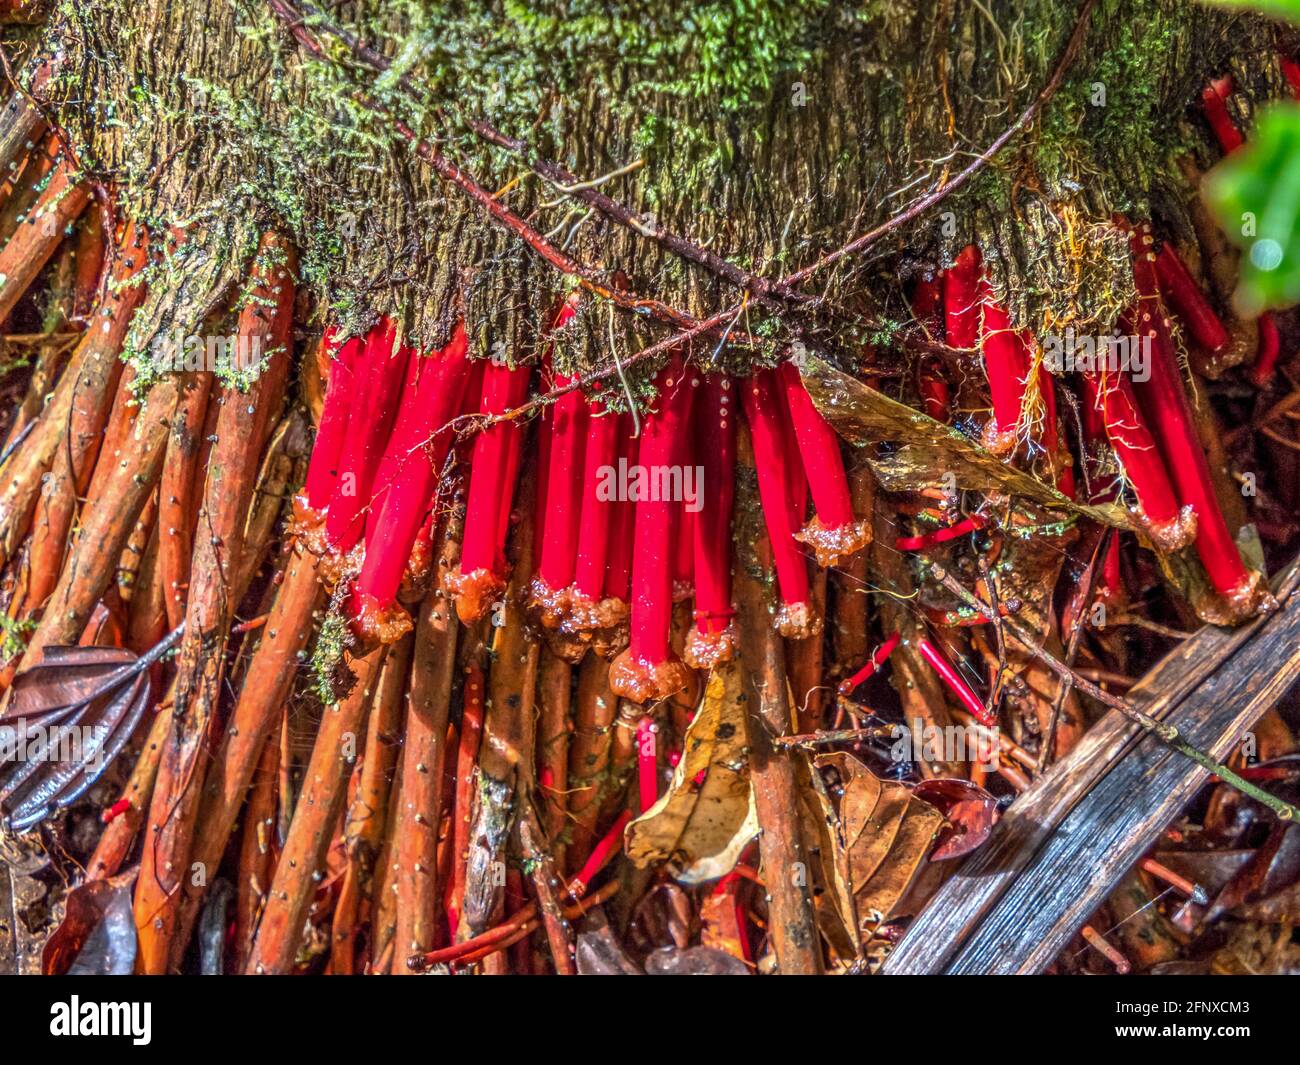 Medicinal plants in the Amazonia. Wasai, tree with red, walking roots in the Amazon Rainforest in Brazil. South America. Stock Photo